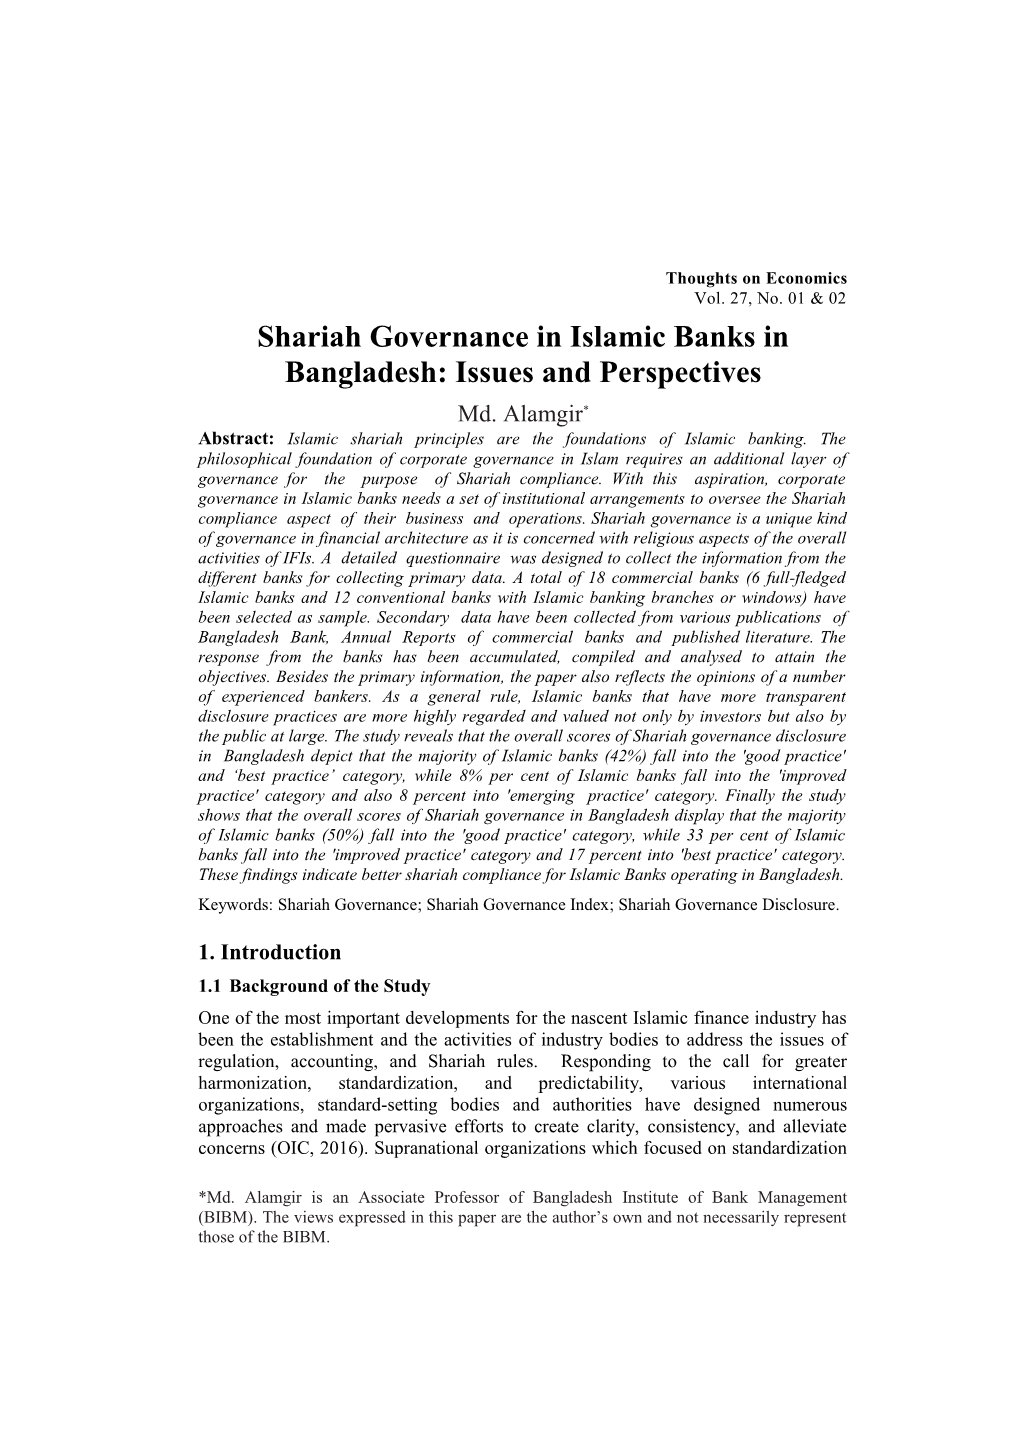 Shariah Governance in Islamic Banks in Bangladesh:Issues and Perspectives